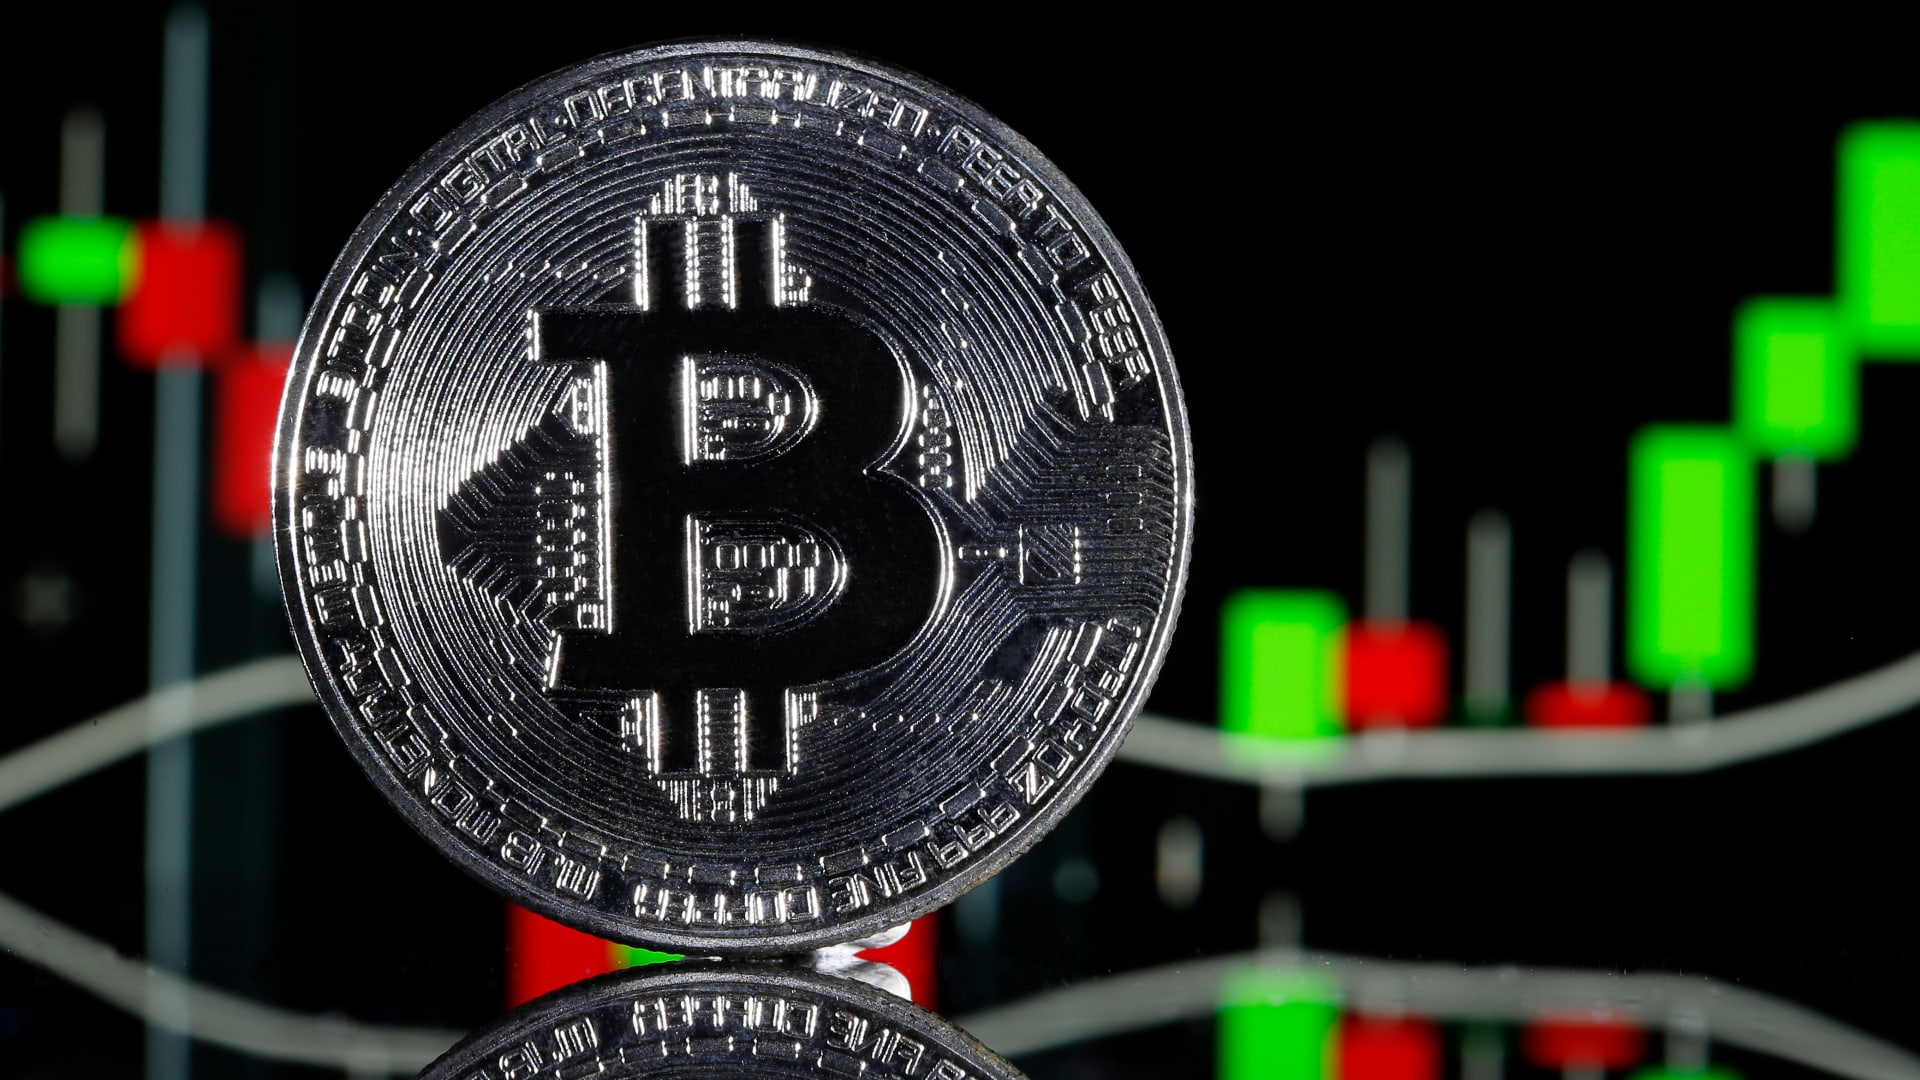 Bitcoin Surges to $66,000 as U.S. Macro Data Boosts Risk Assets